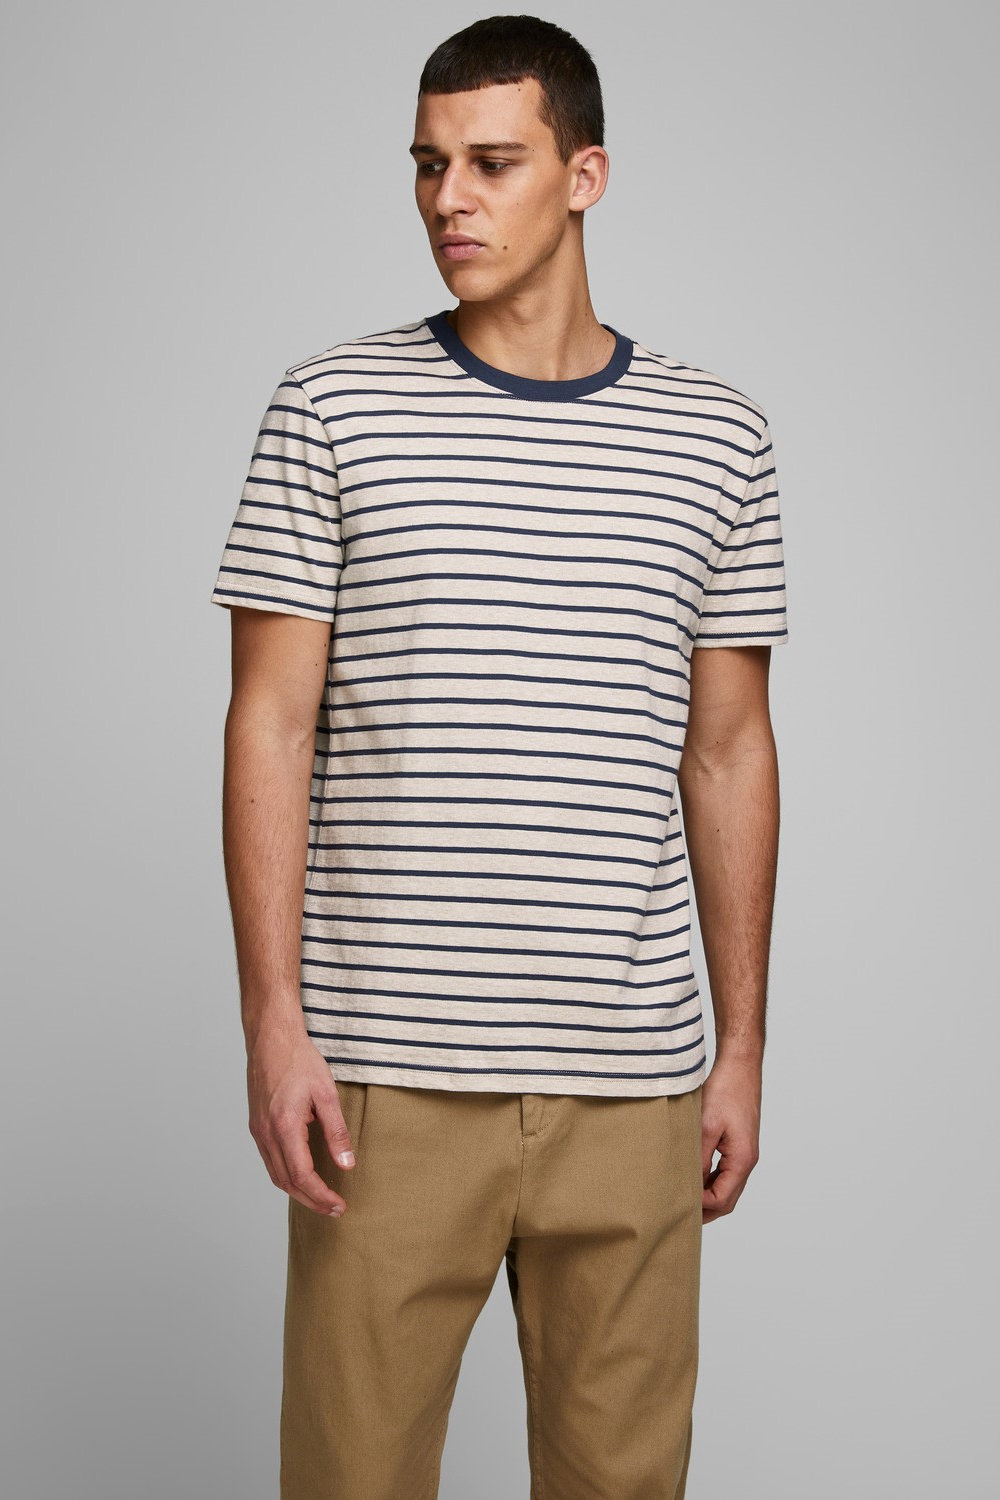 Jack and Jones striped tshirt ss 2 colours